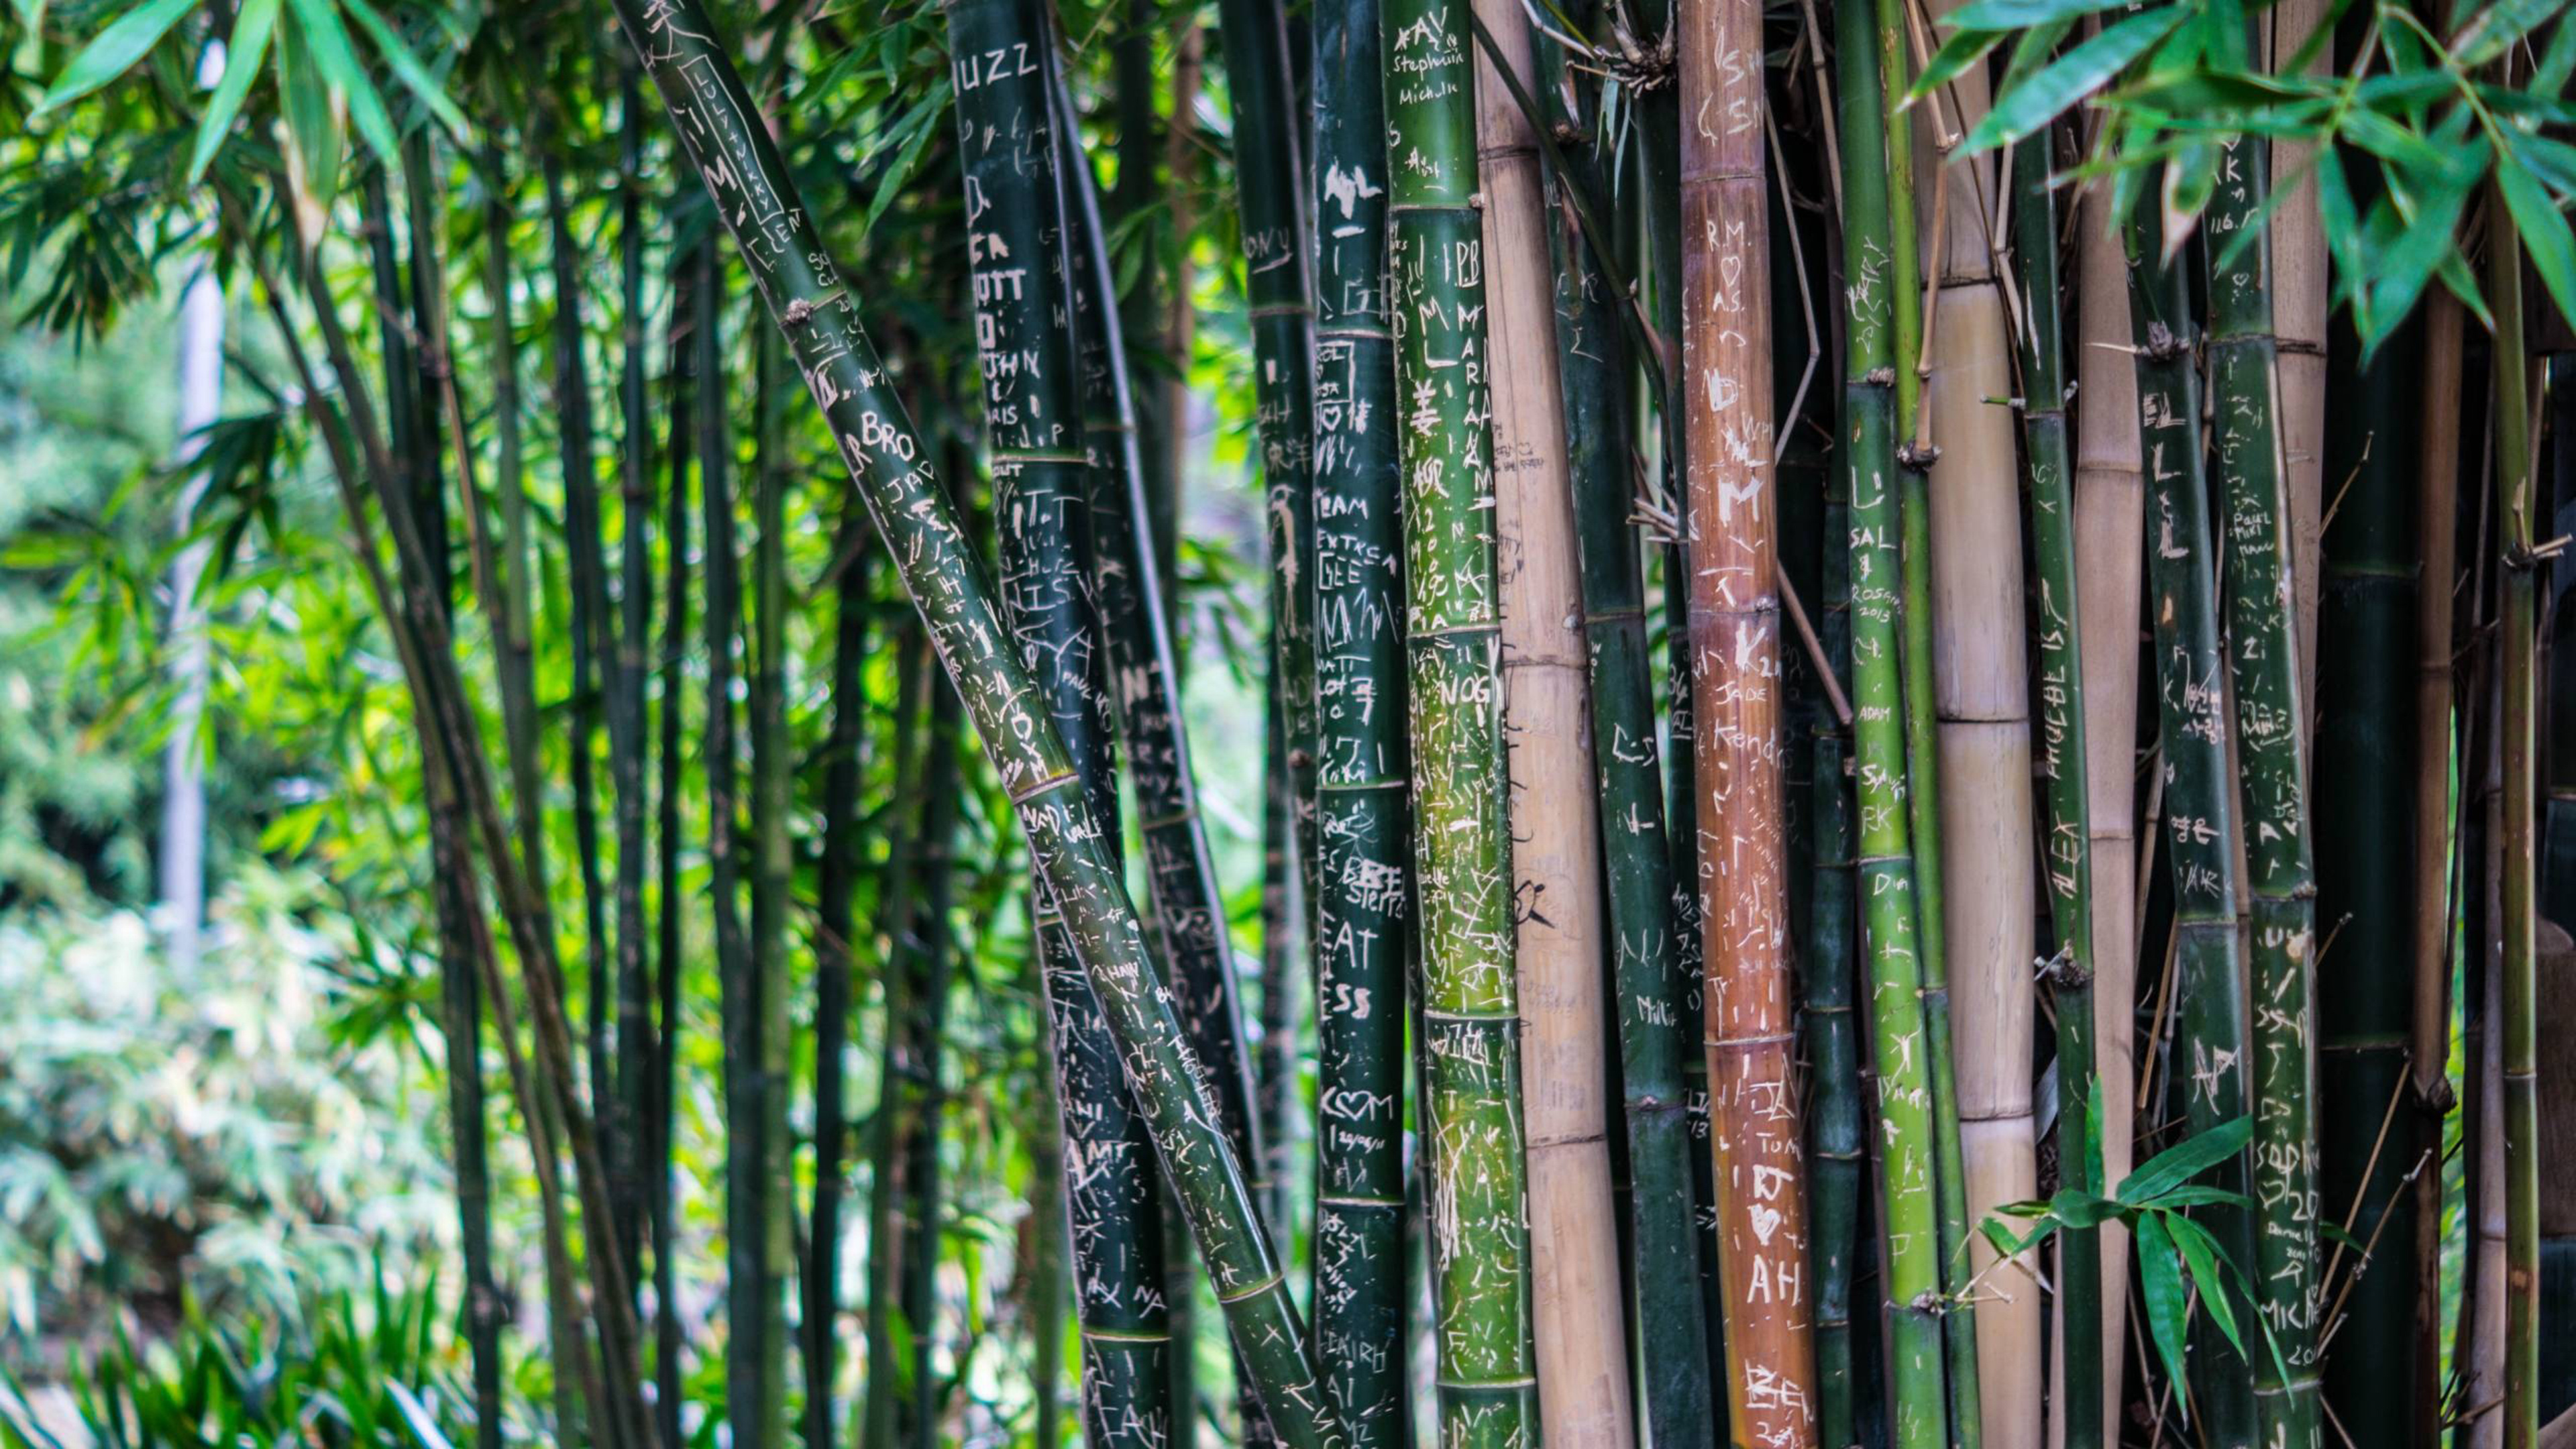 Bamboo: Plant is used for building materials, as a food source, and as a raw product. 3840x2160 4K Wallpaper.